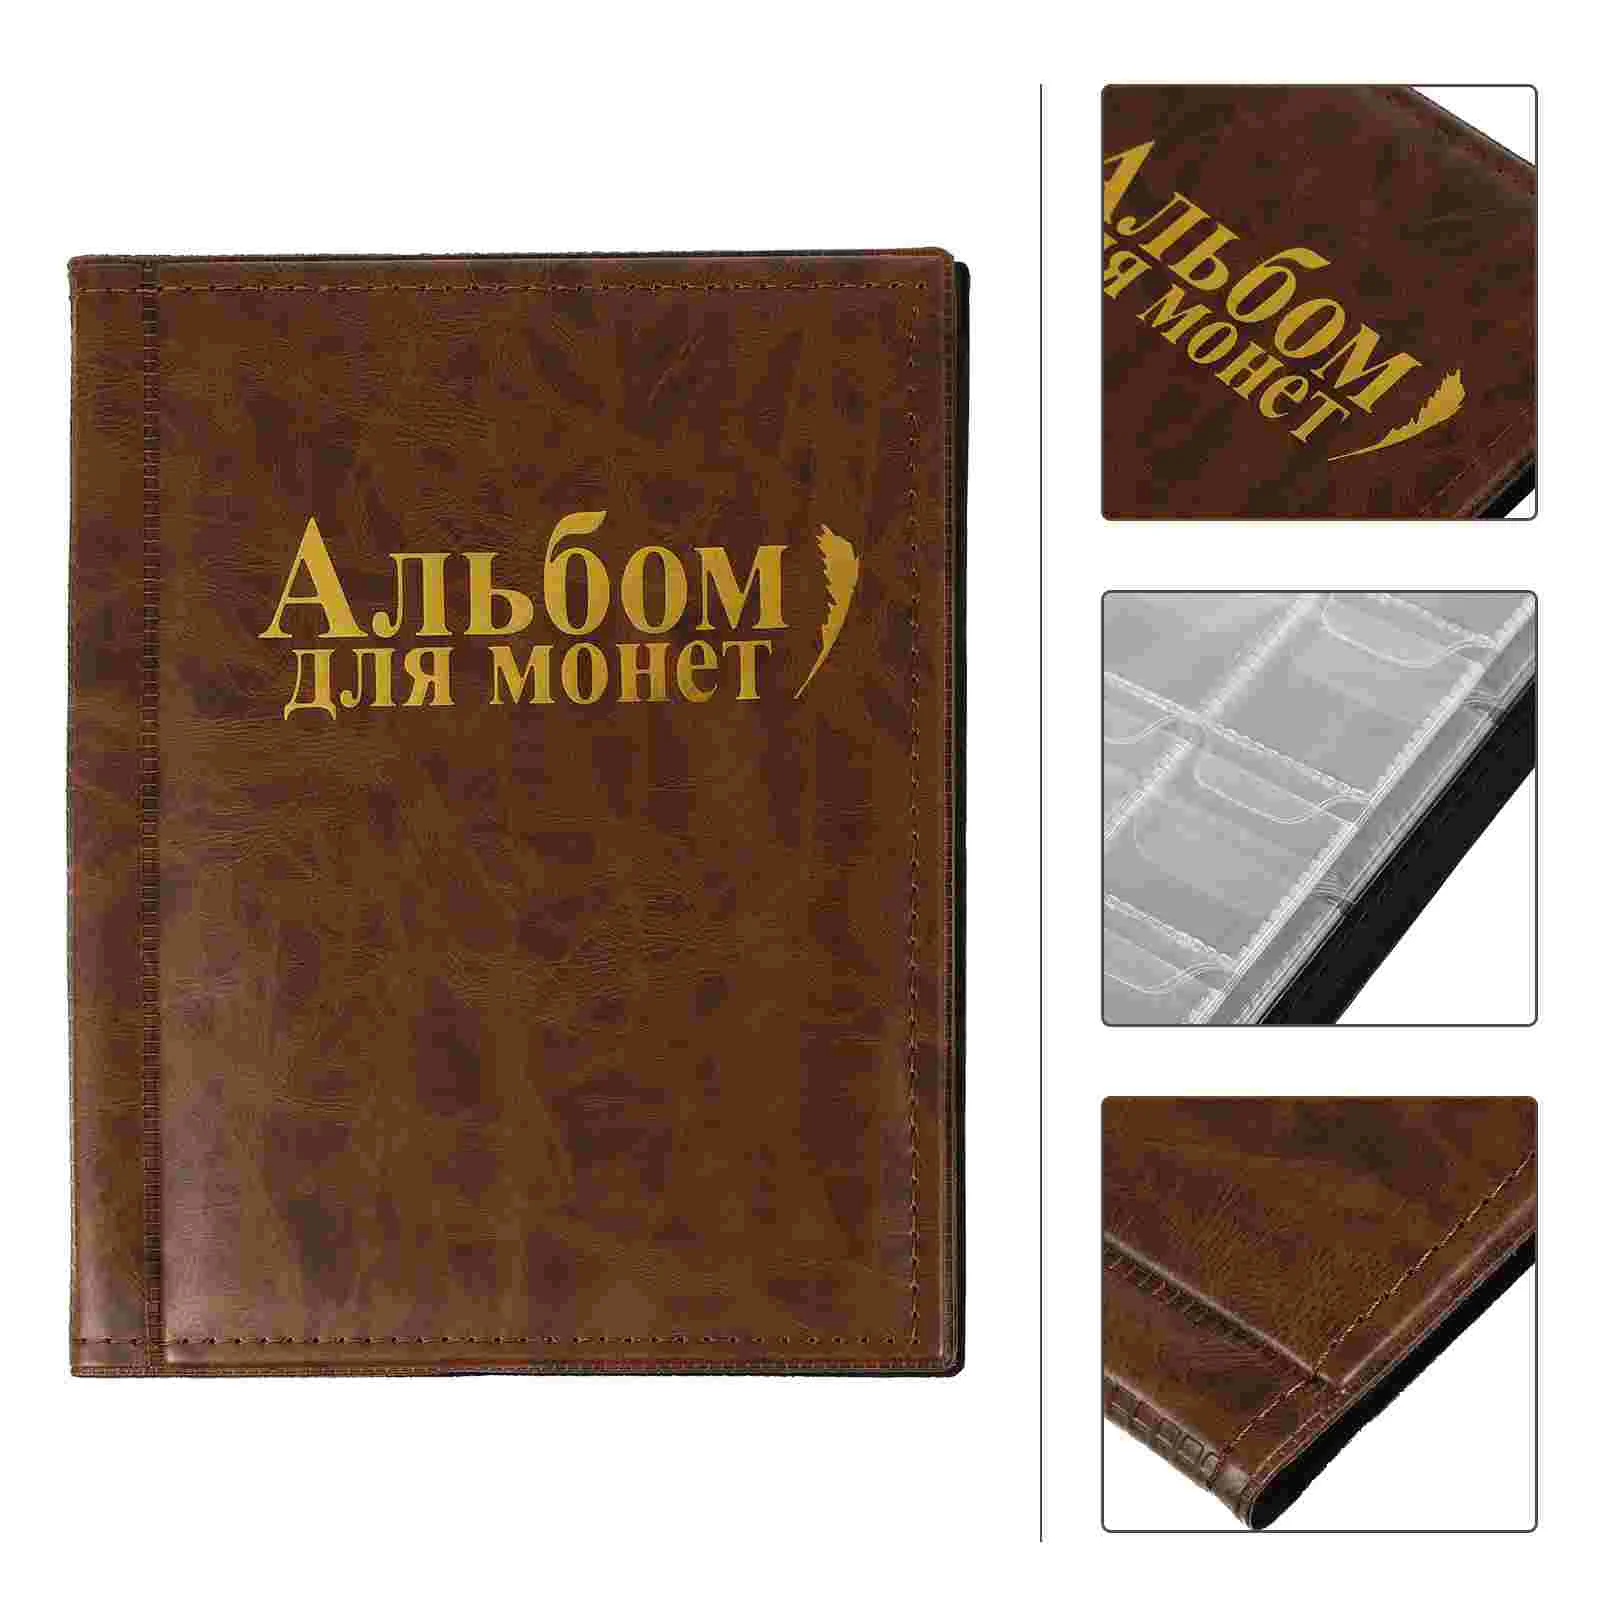 

Holder Album for Collectors Paper 250 Pockets Storage Book for Dollars Currency Quarters Foreign